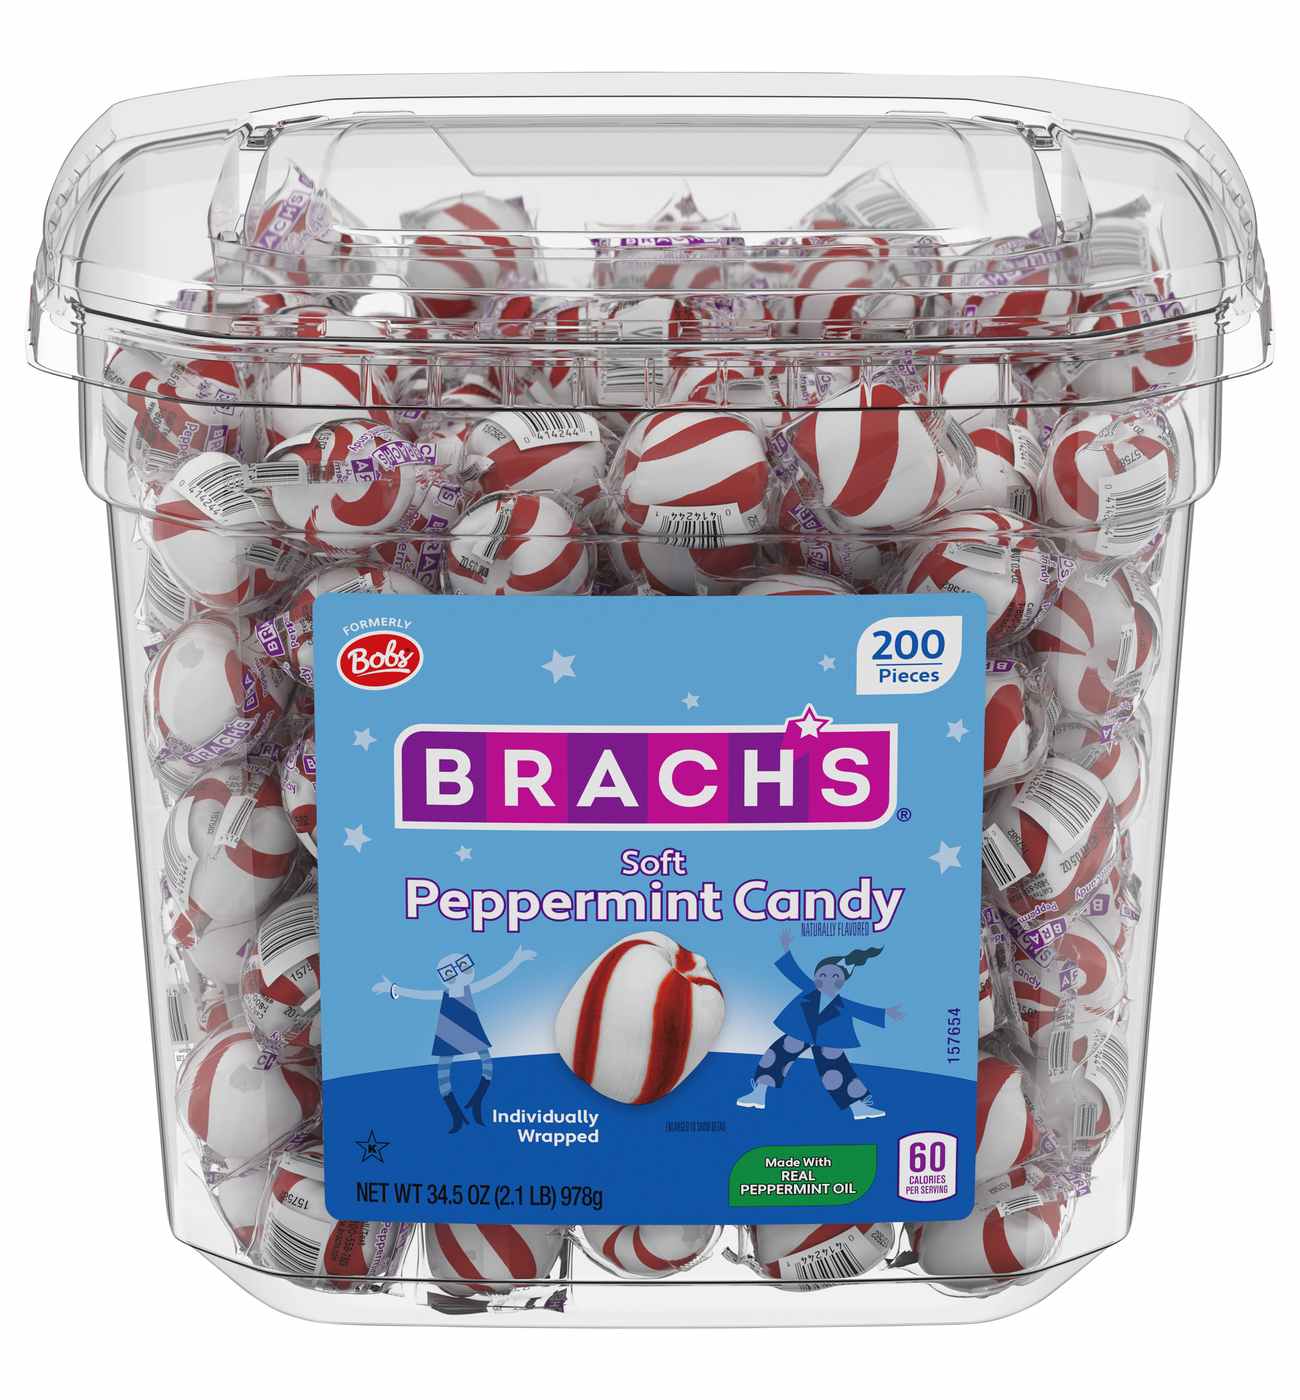 Brach's Soft Peppermint Candy; image 1 of 2